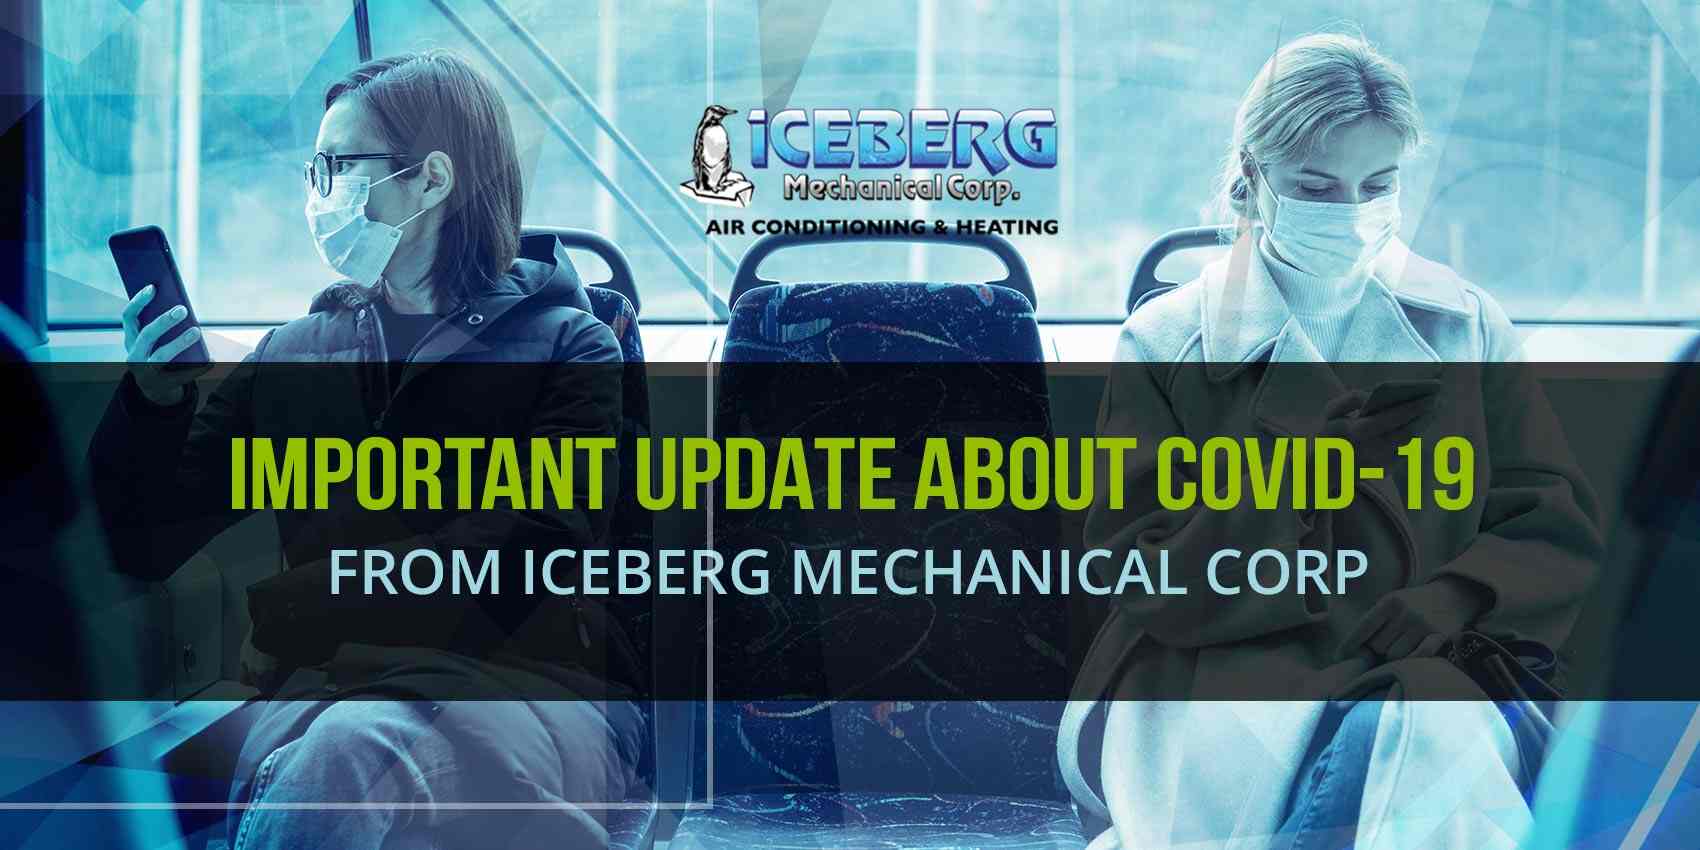 Important update about COVID-19 from Iceberg Mechanical Corp